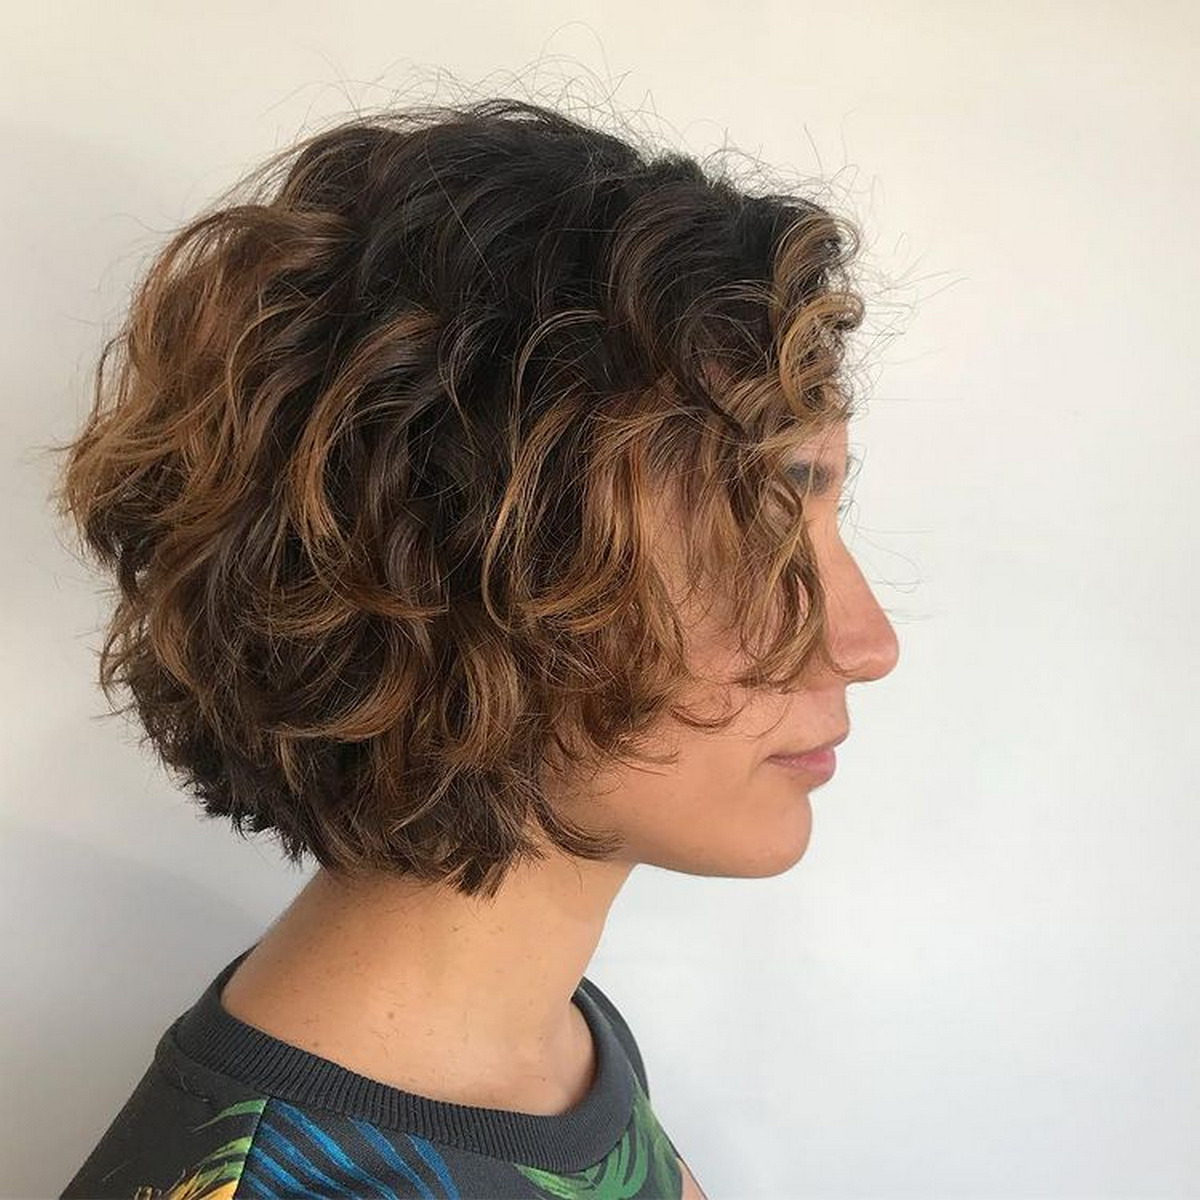 Short-Stacked Curly Bob